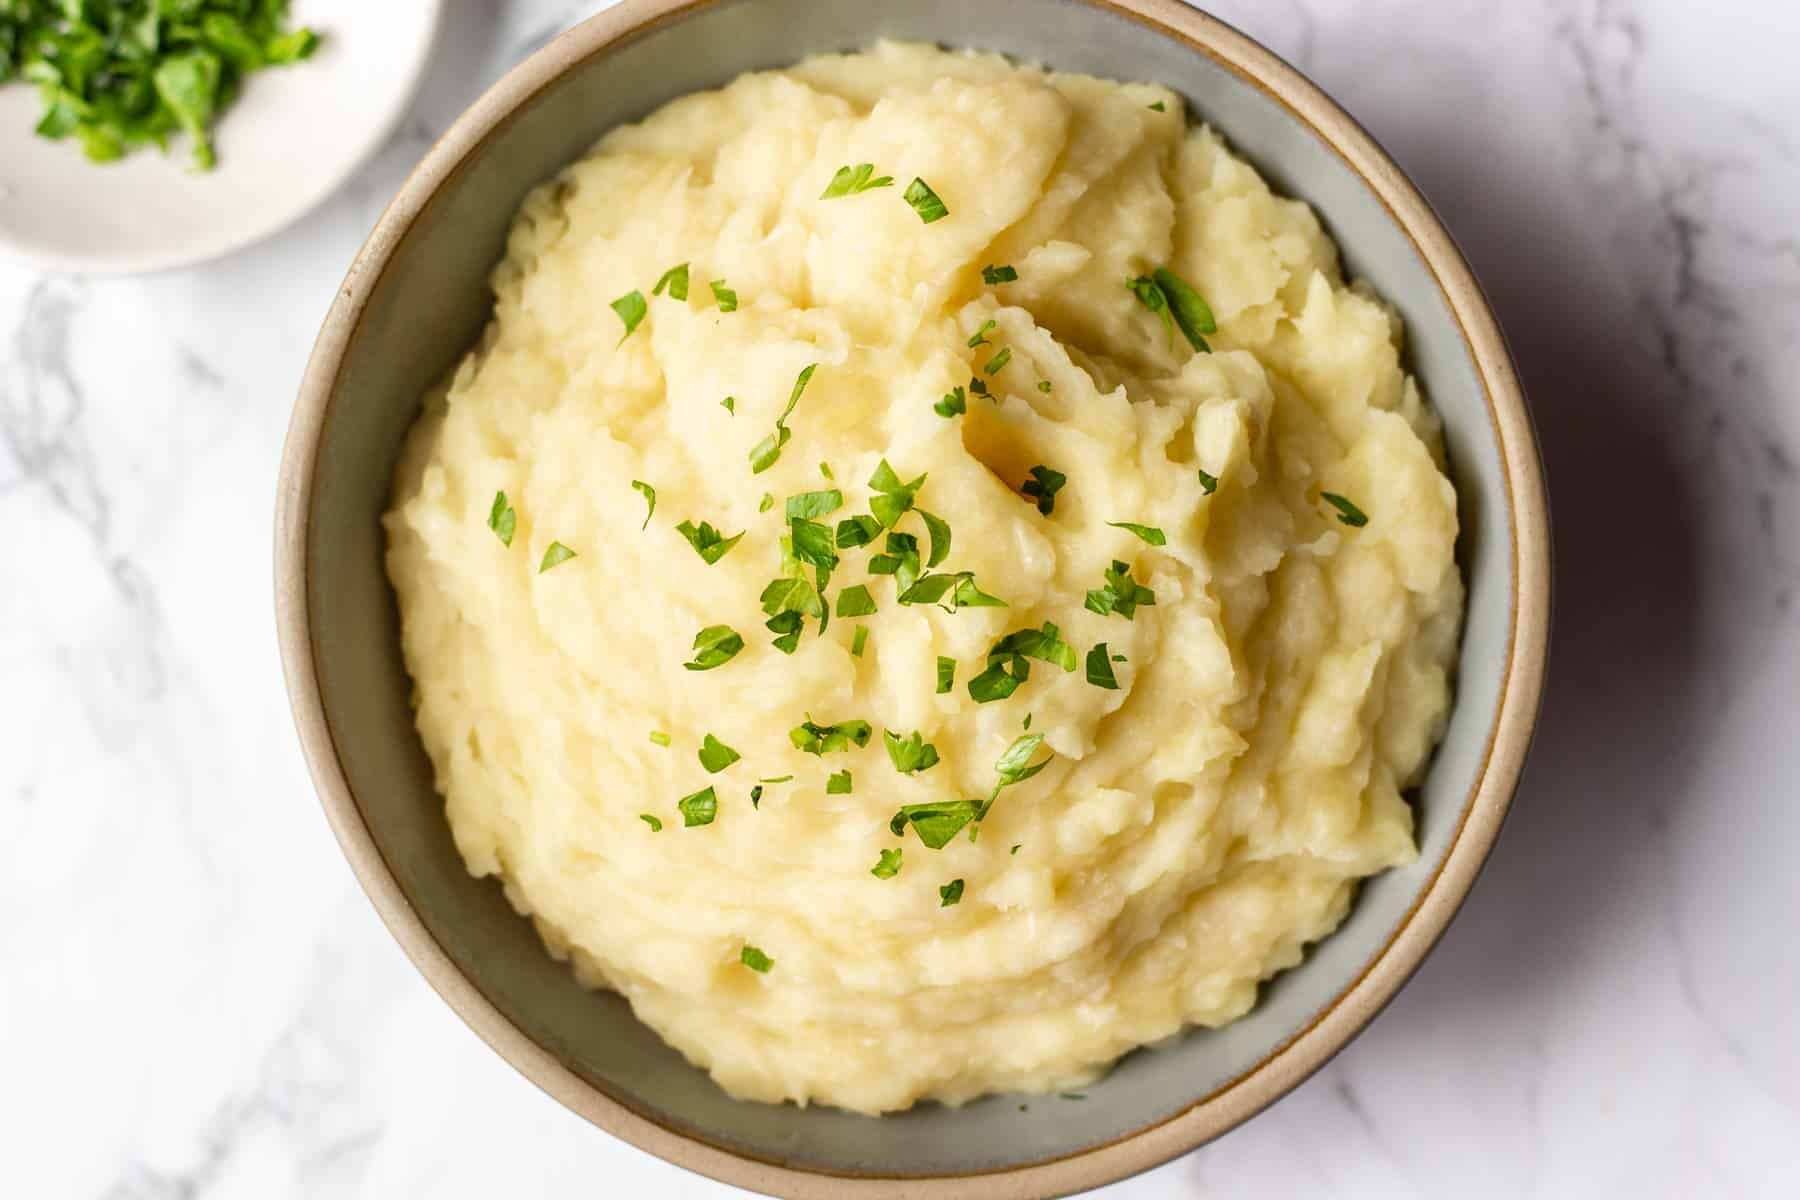 Creamy and Healthy Mashed Potatoes Recipe Details